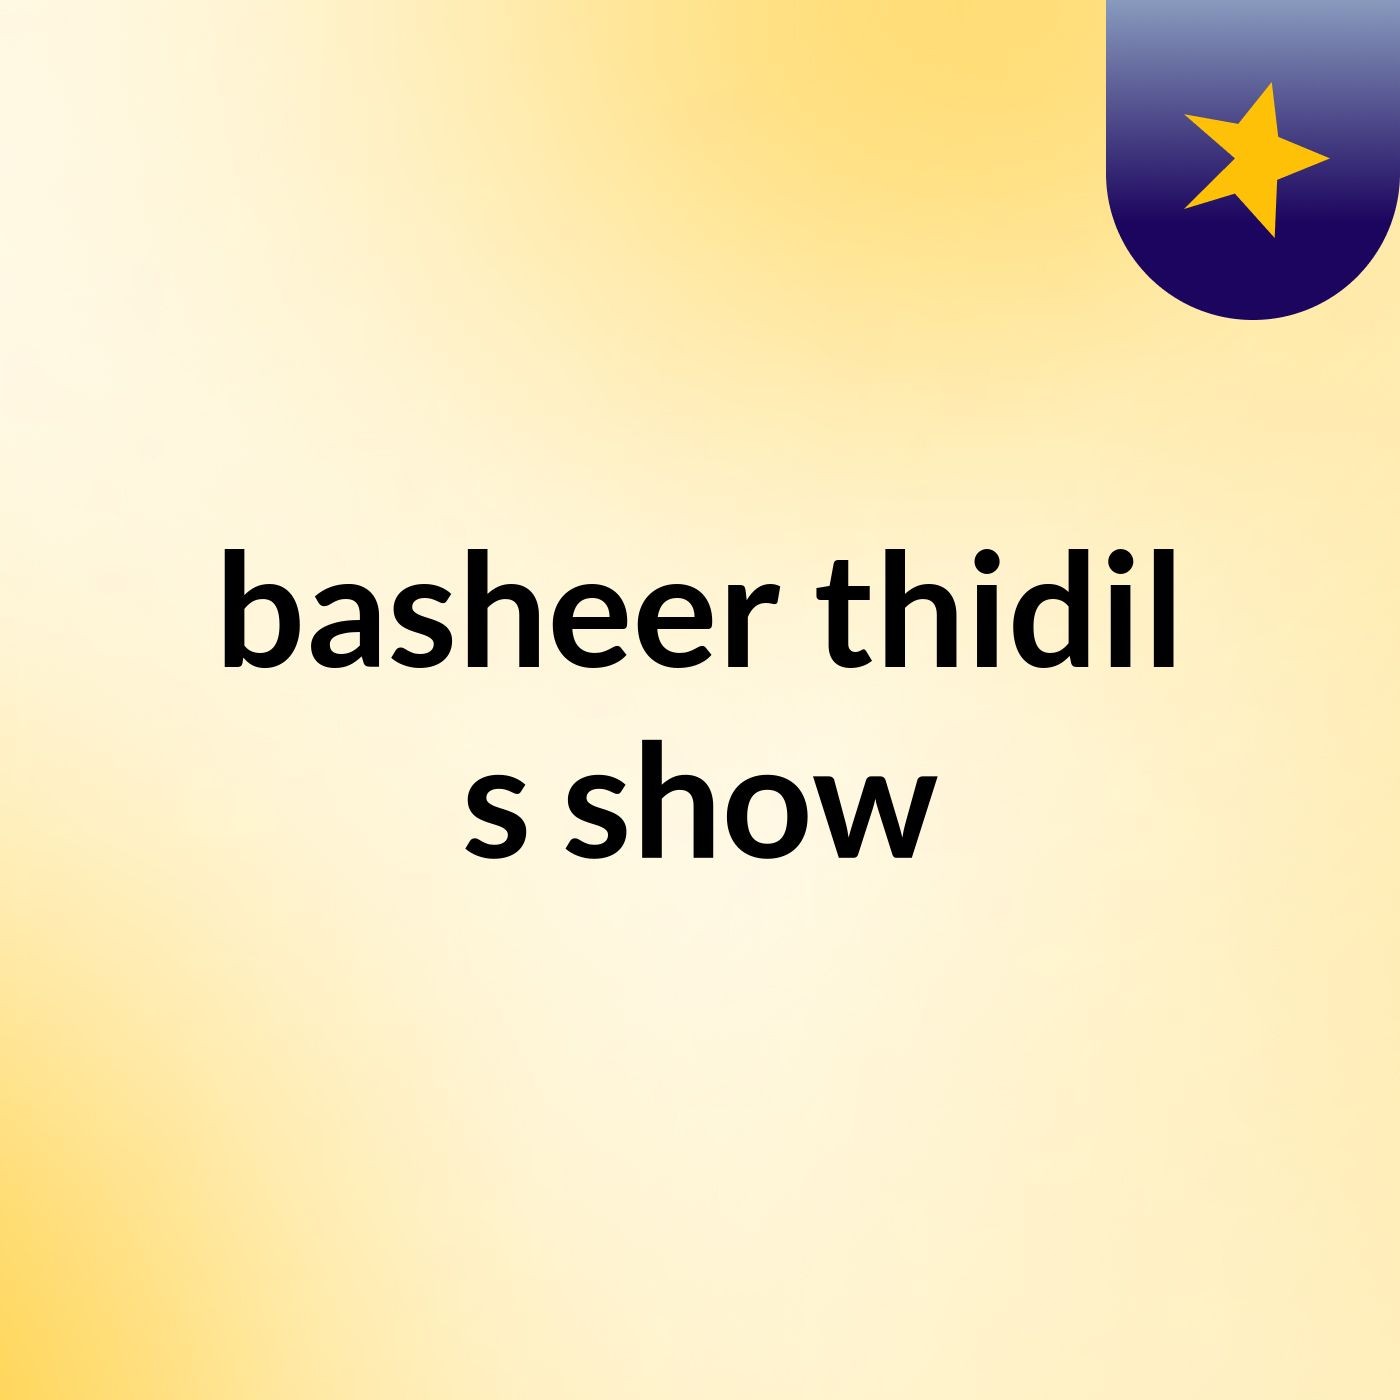 Episode 3 - basheer thidil's show